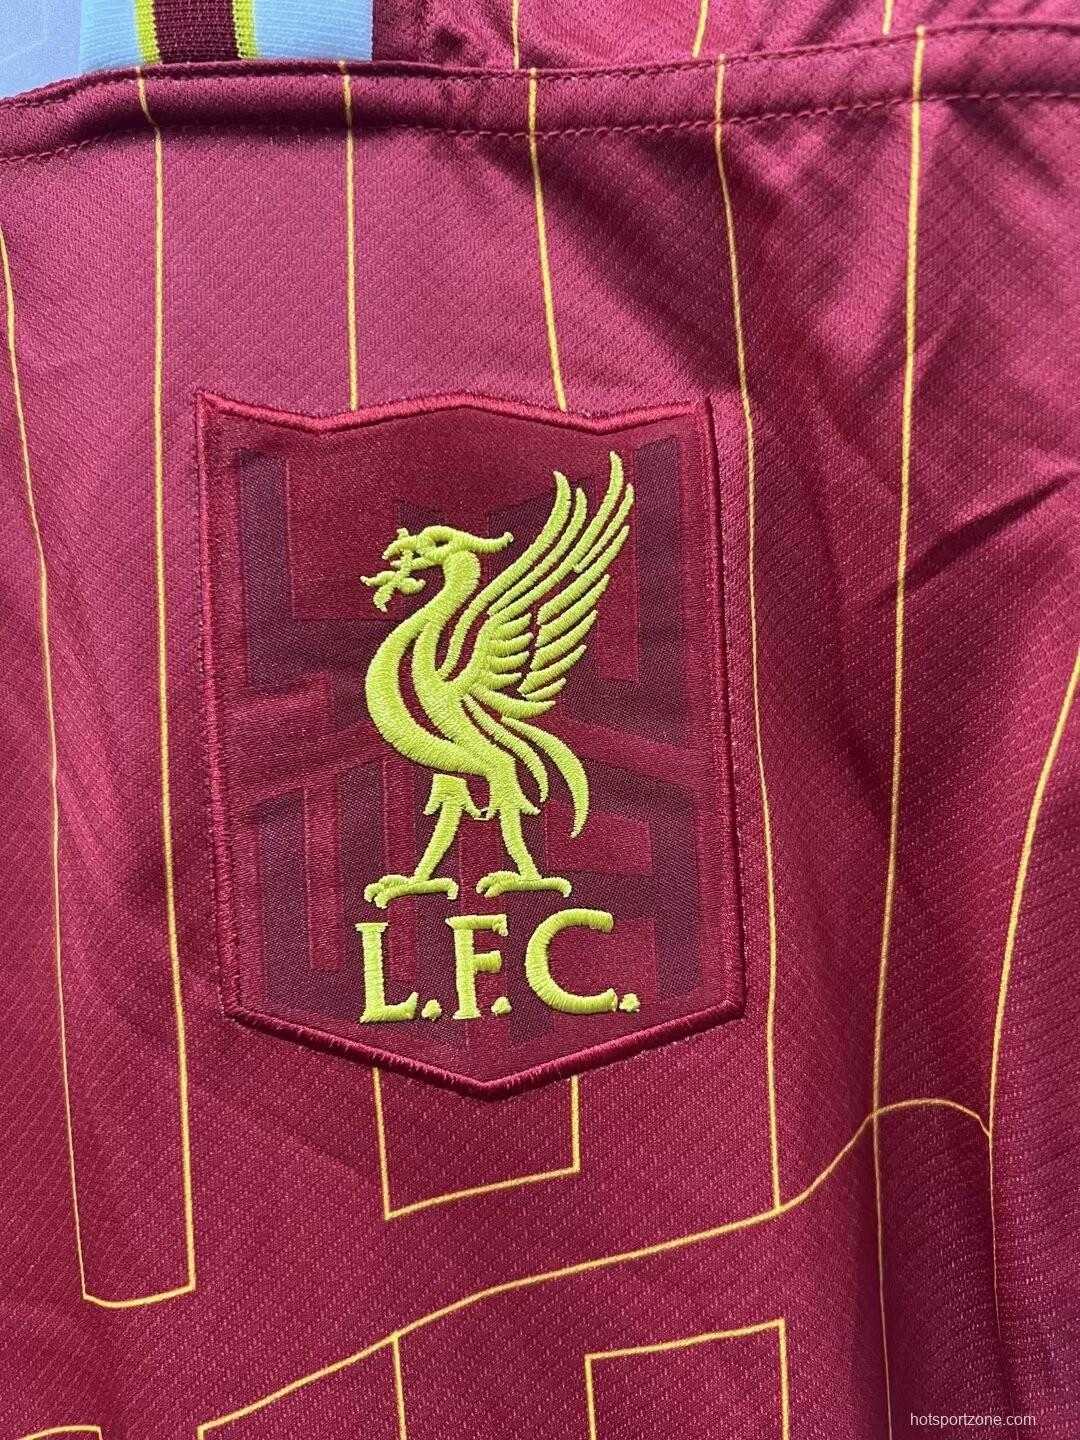 24/25 Liverpool Home Jersey